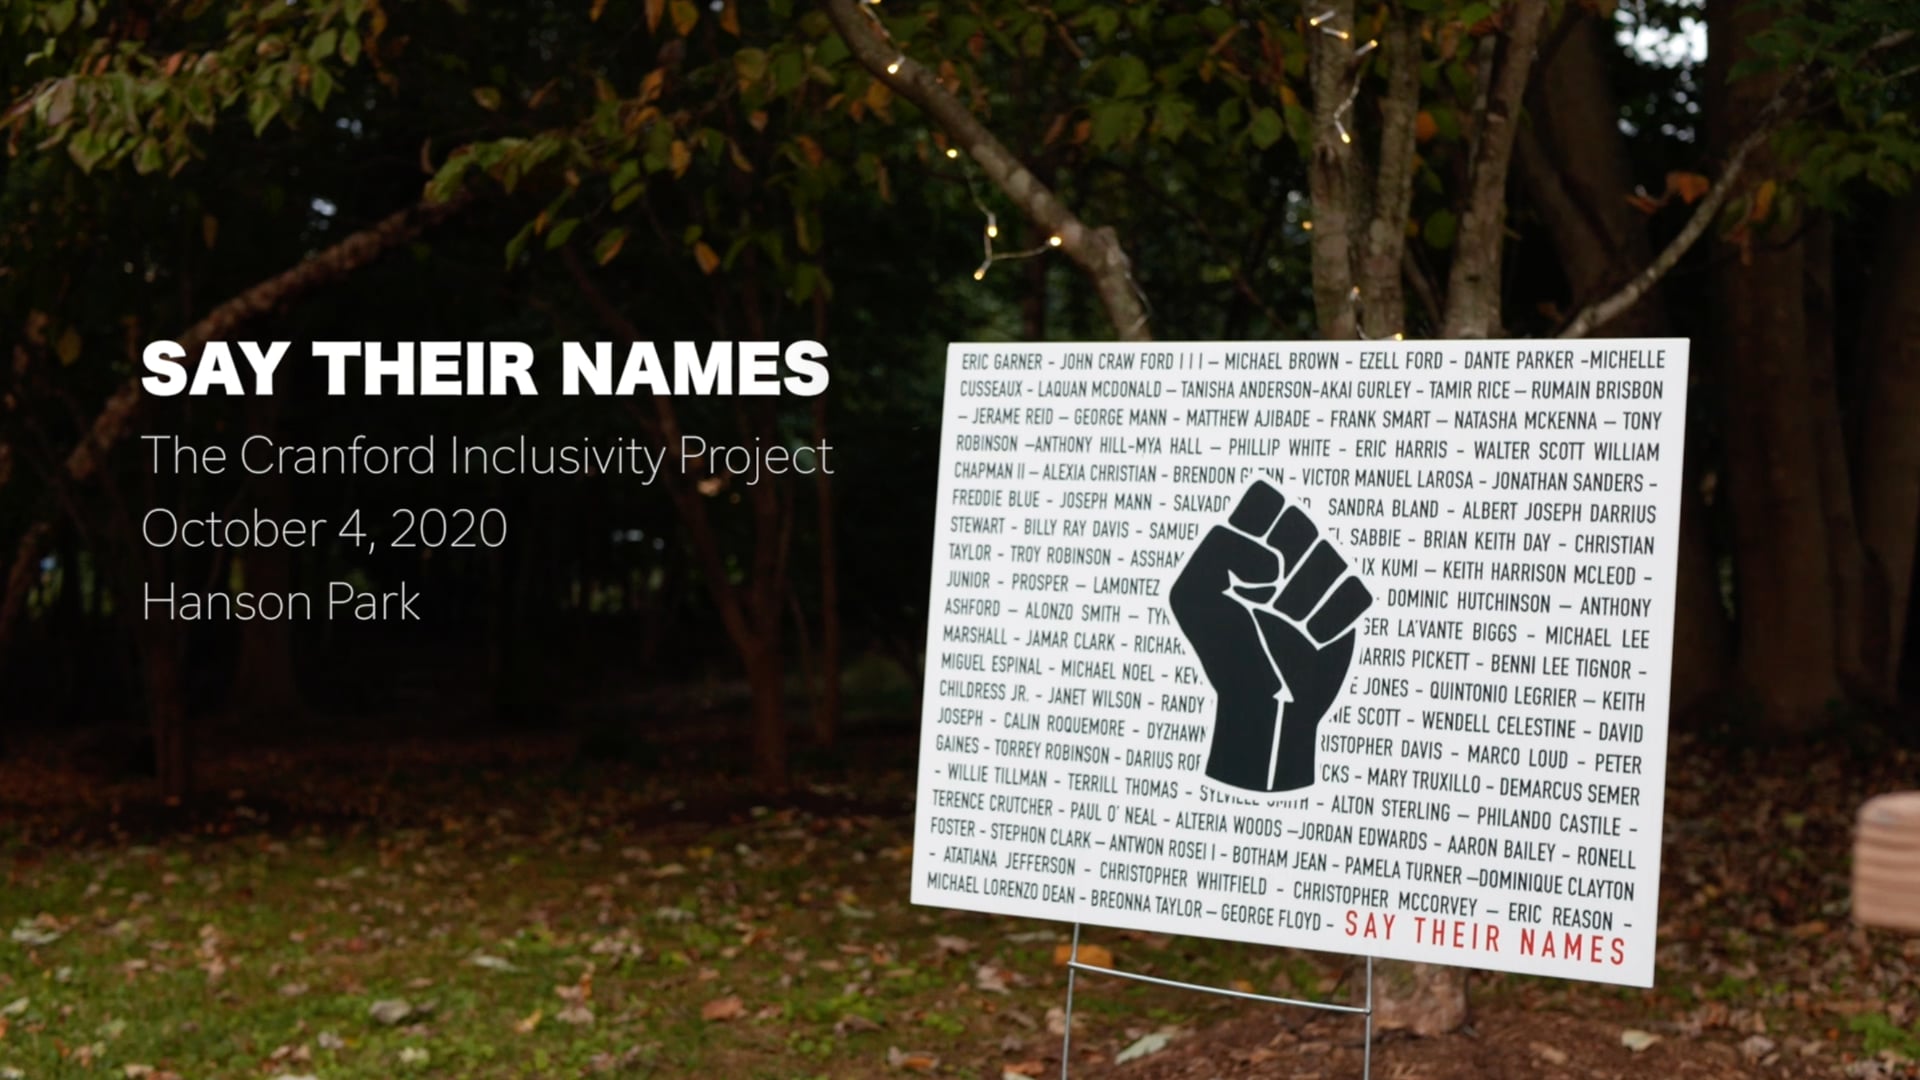 Say Their Names - Cranford Inclusivity Project